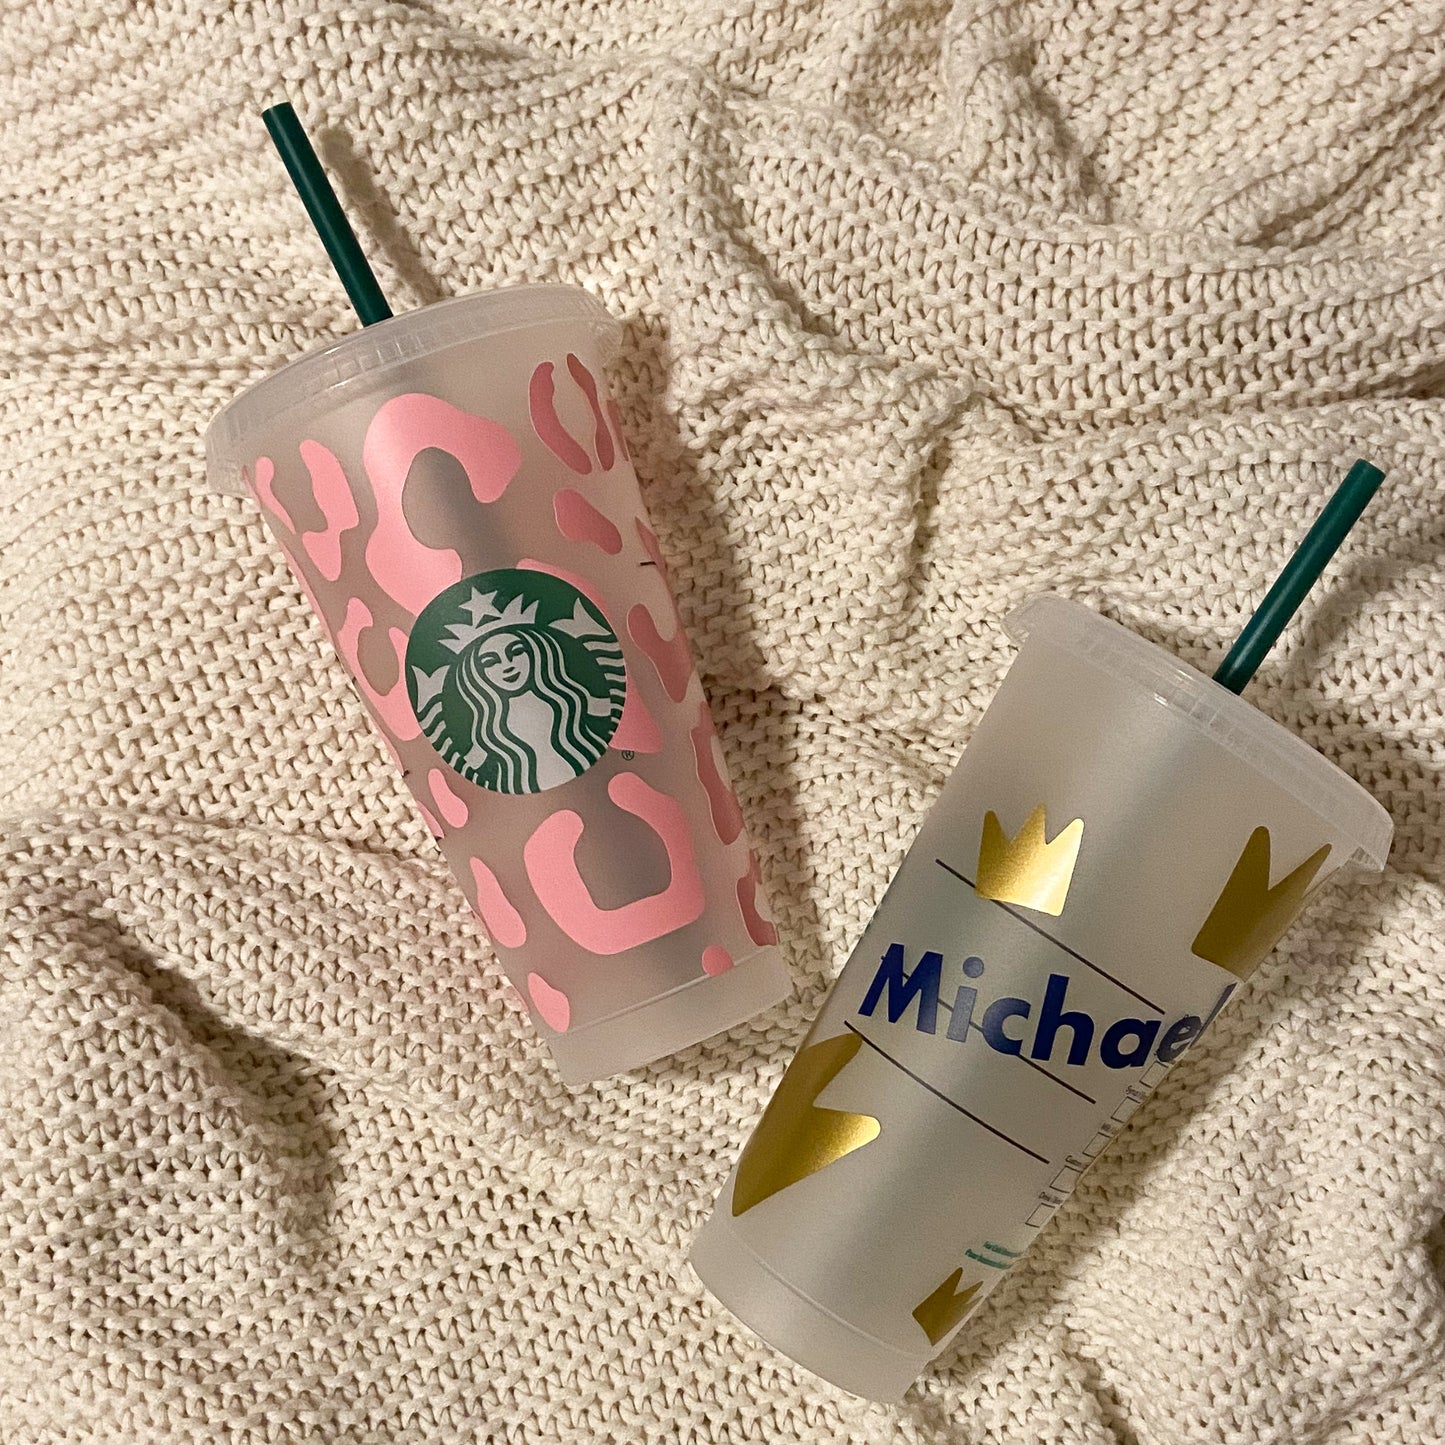 Crown Starbucks Cup - Custom Personalized